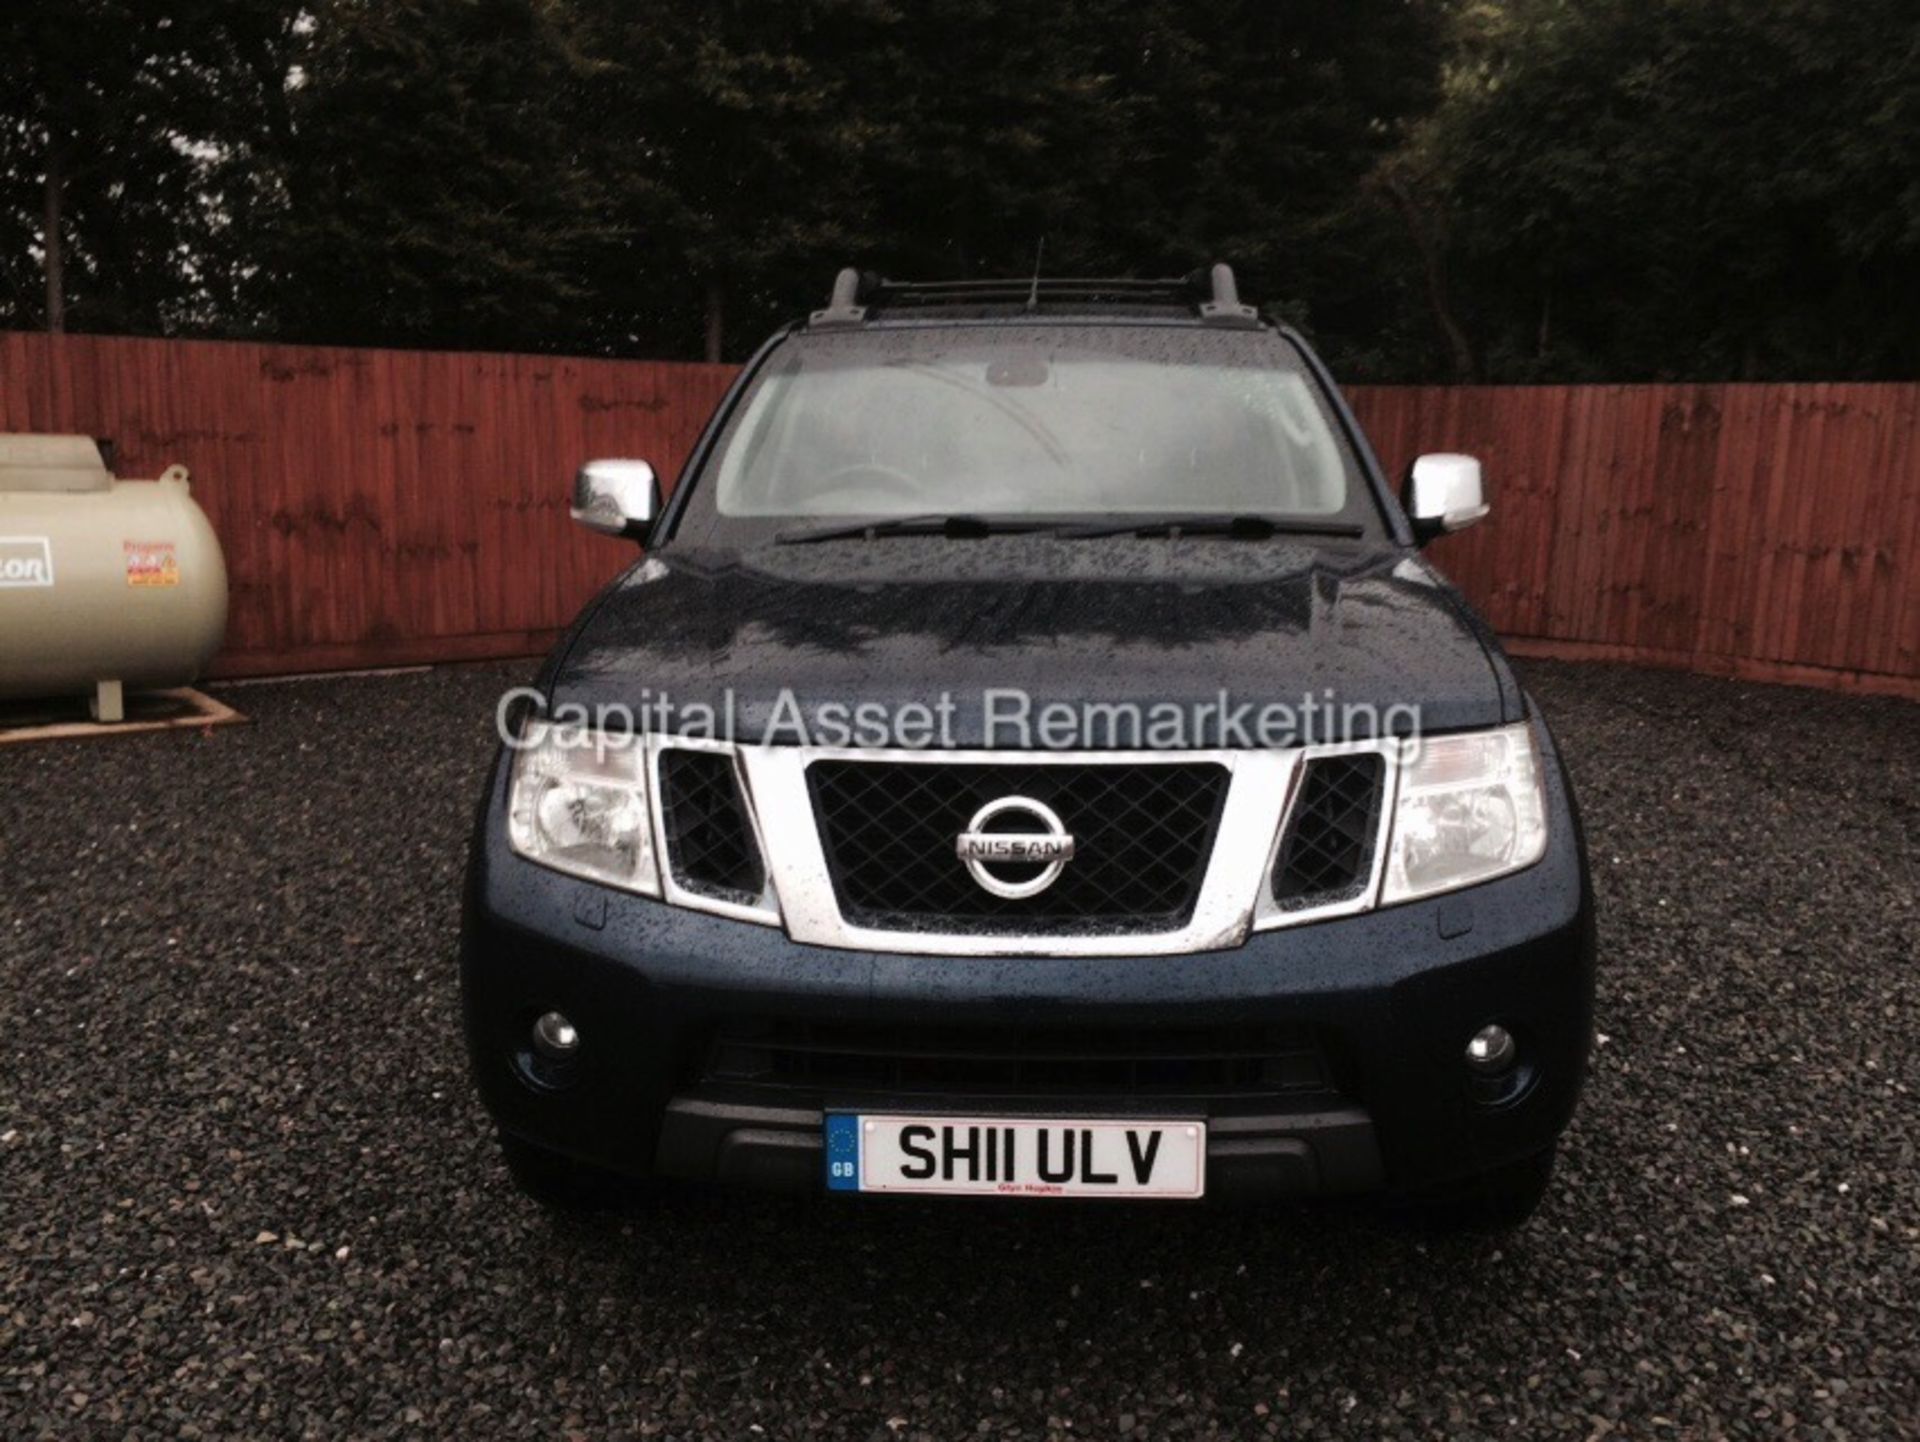 NISSAN NAVARA 'TEKNA' DOUBLE CAB PICK-UP (2011 - 11 REG) 2.5 DCI - 188 PS - 6 SPEED - LEATHER - A/C - Image 2 of 12